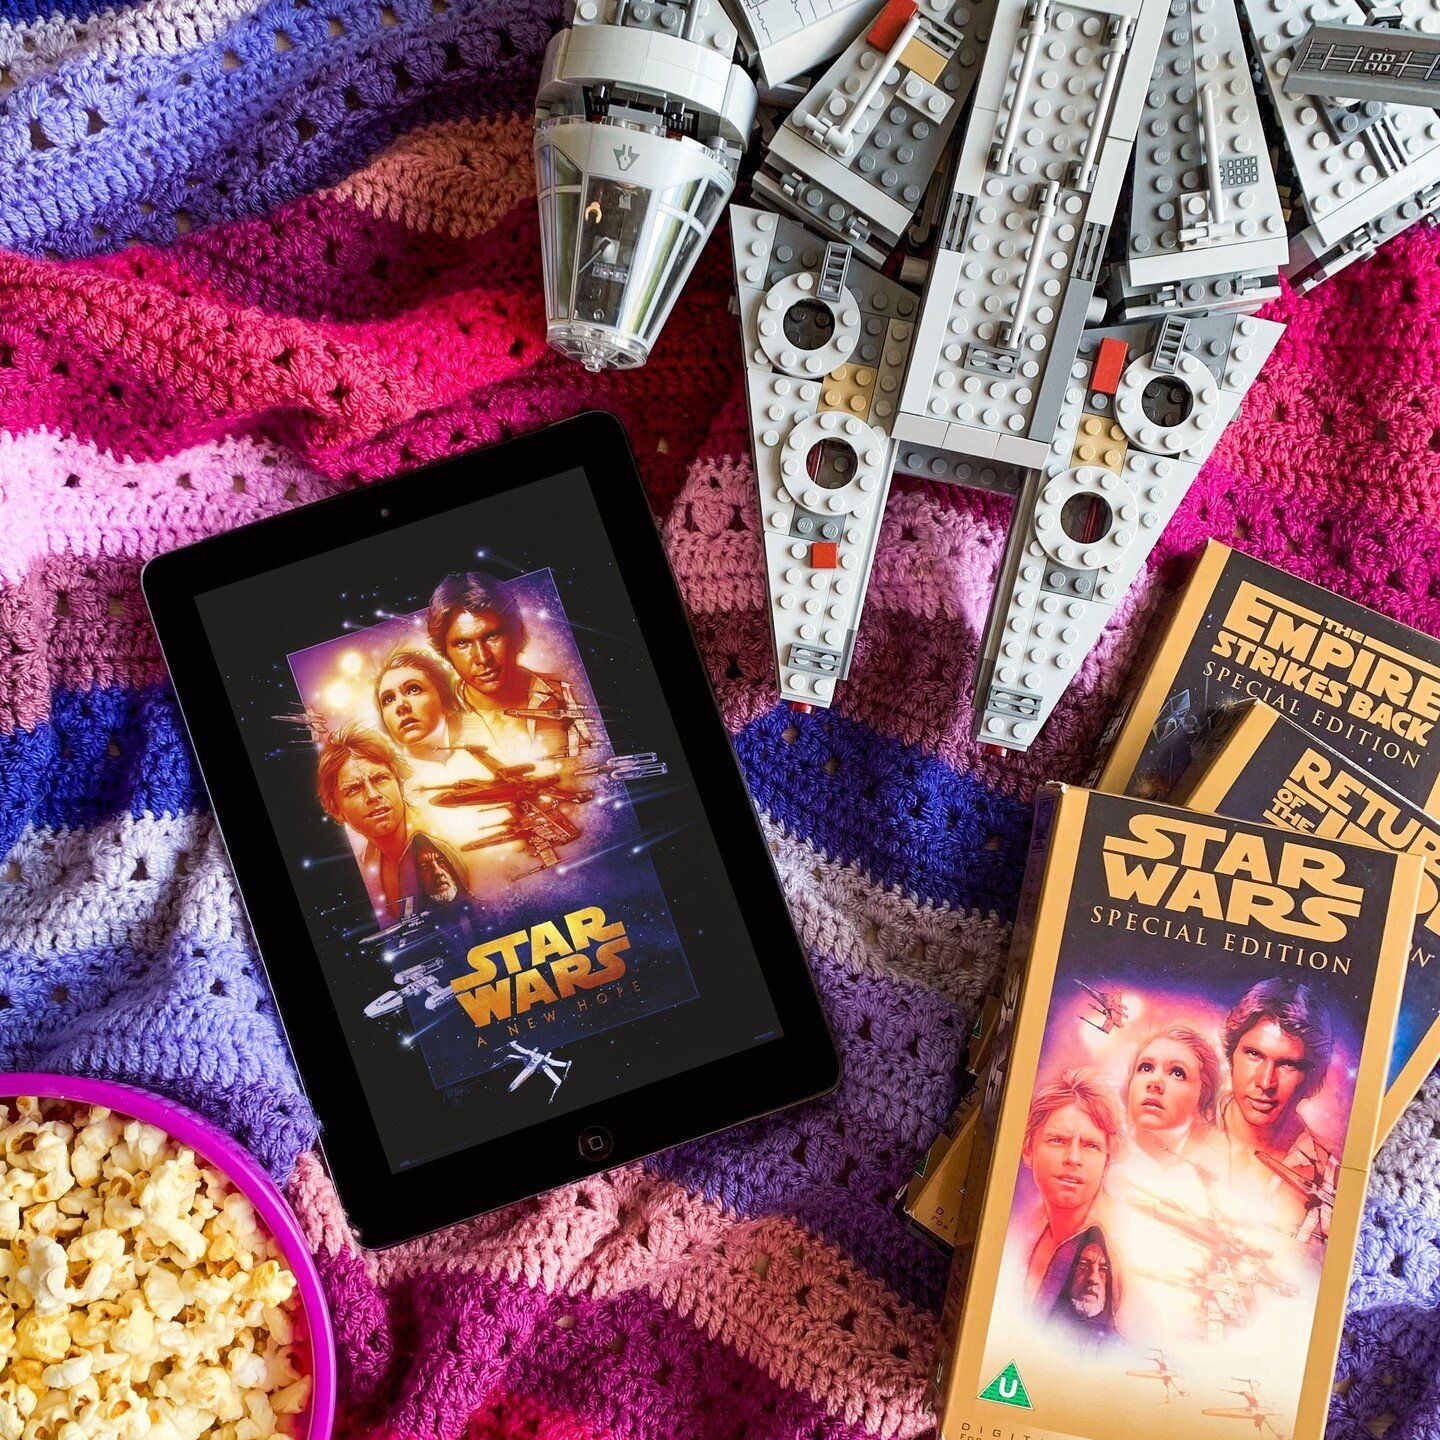 What is your favourite Star Wars film? ⭐⁠
⁠
It&rsquo;s an exciting time to be a Star Wars fan right now, so in anticipation of the Kenobi series starting this week, we&rsquo;re taking the chance to look back on the film that started it all! 🙌⁠
⁠
I (